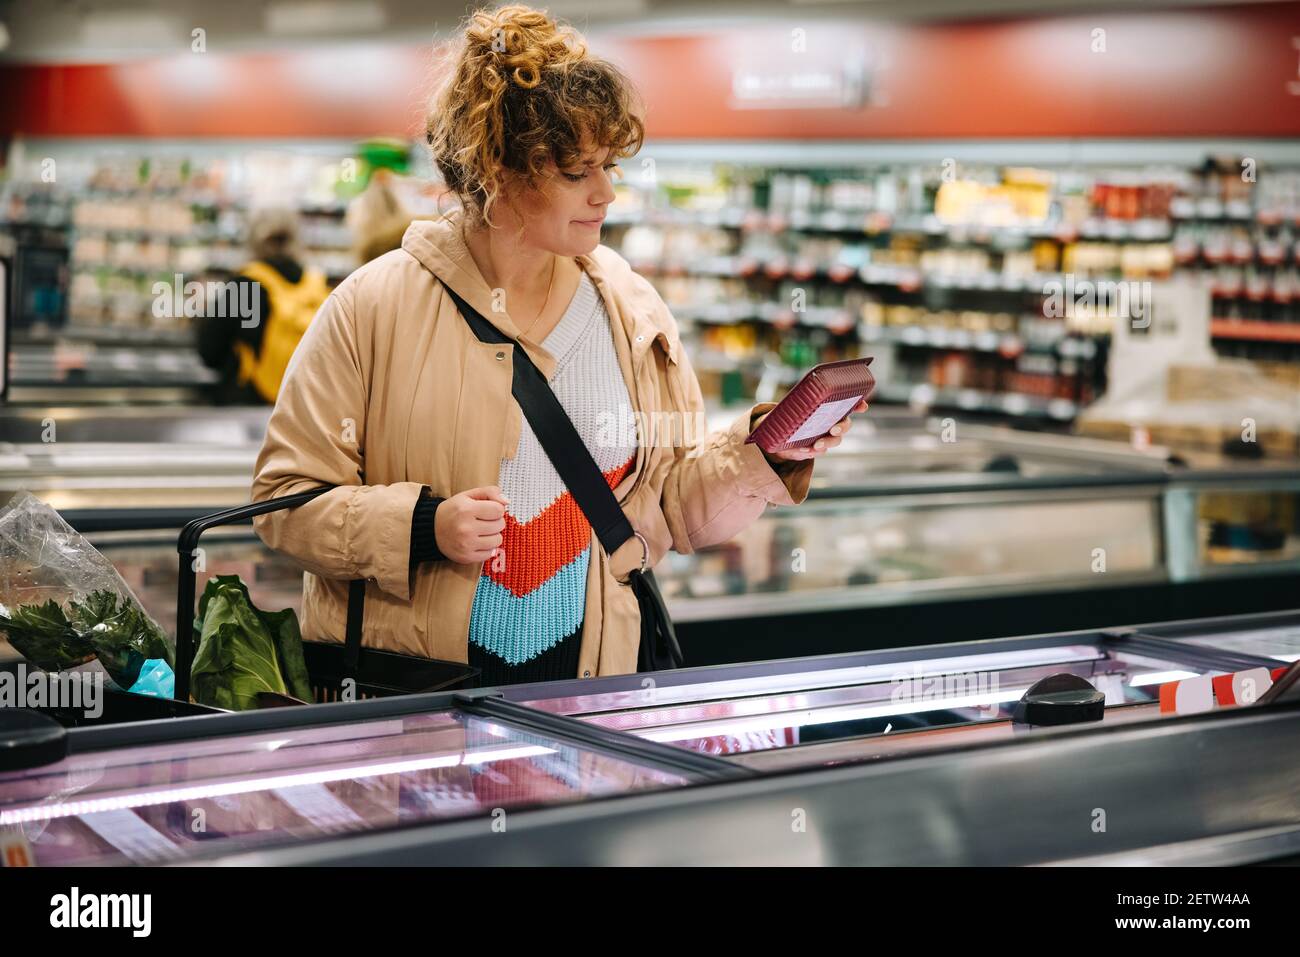 Woman at grocery store reading product information on food products. Female customer looking at label of a food item at grocery store. Stock Photo